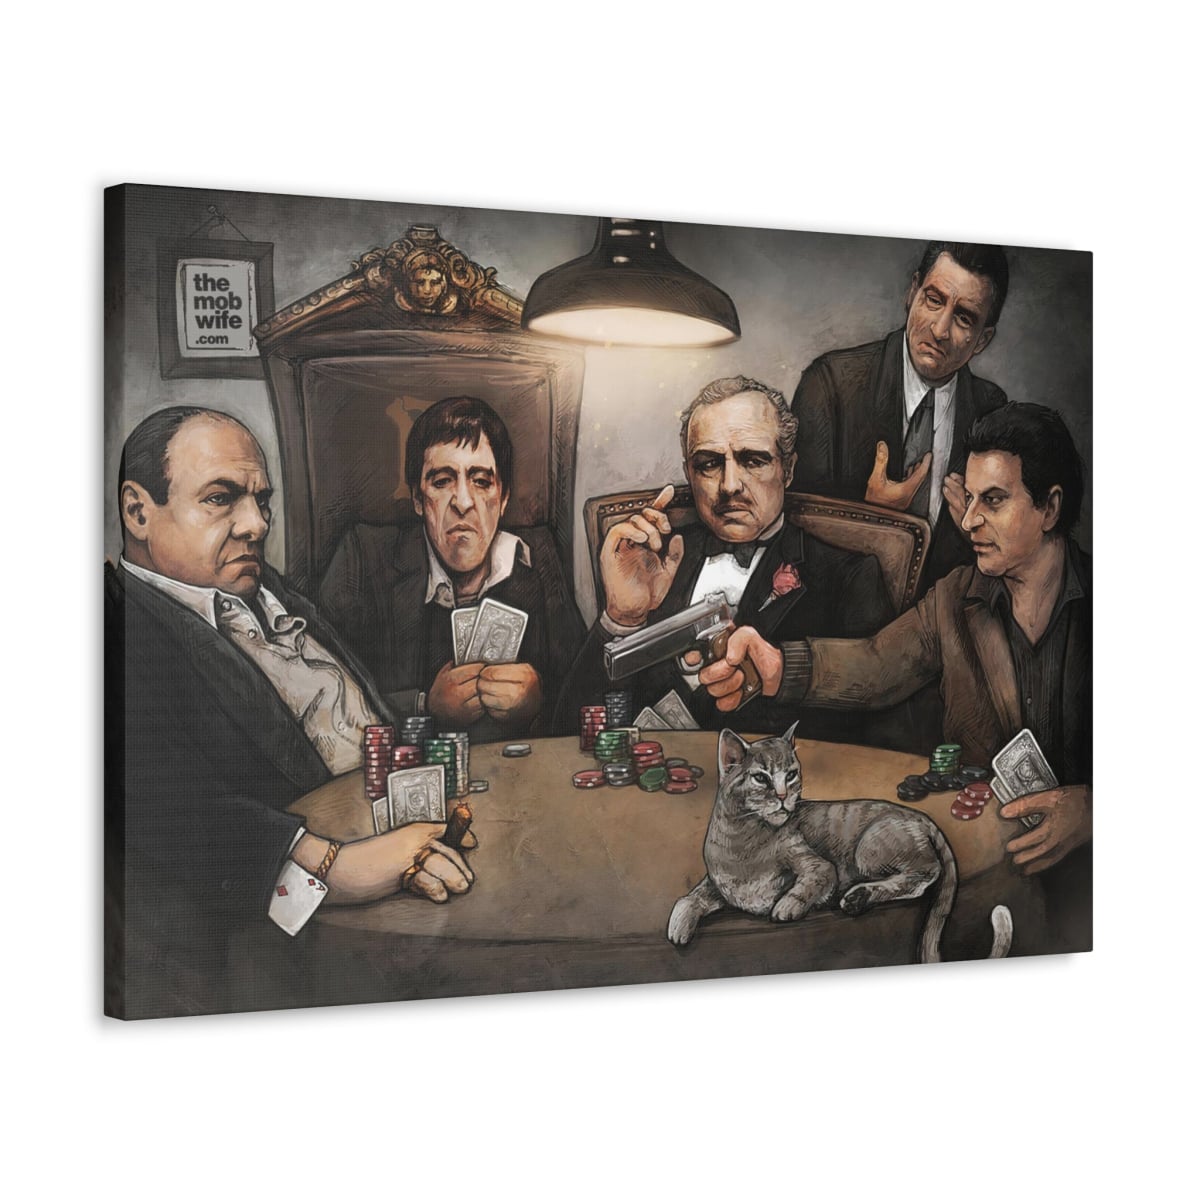 Home Decor Wall Art with Crime Boss Illustration